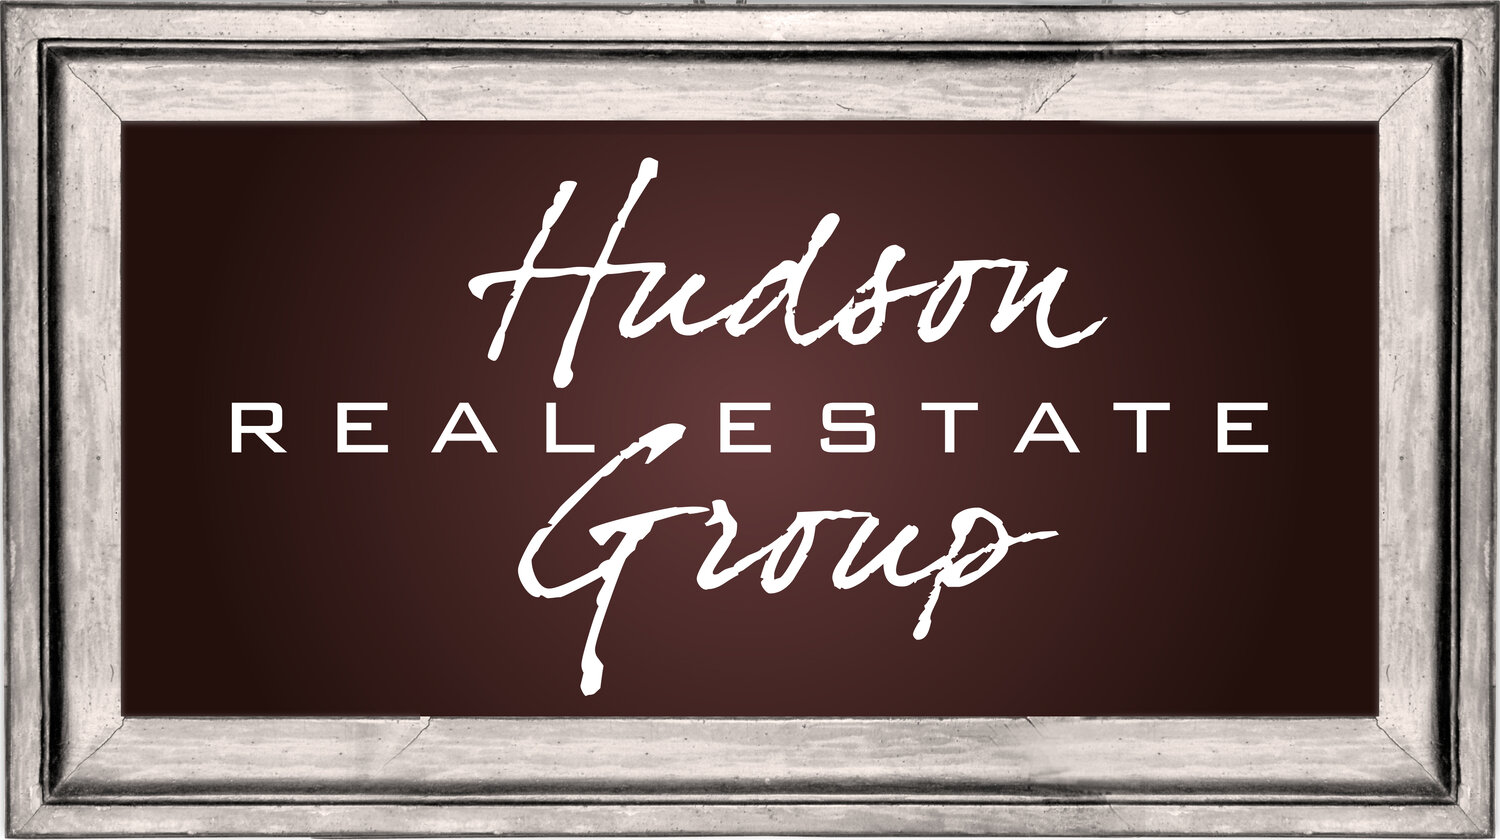 The Hudson Real Estate Group